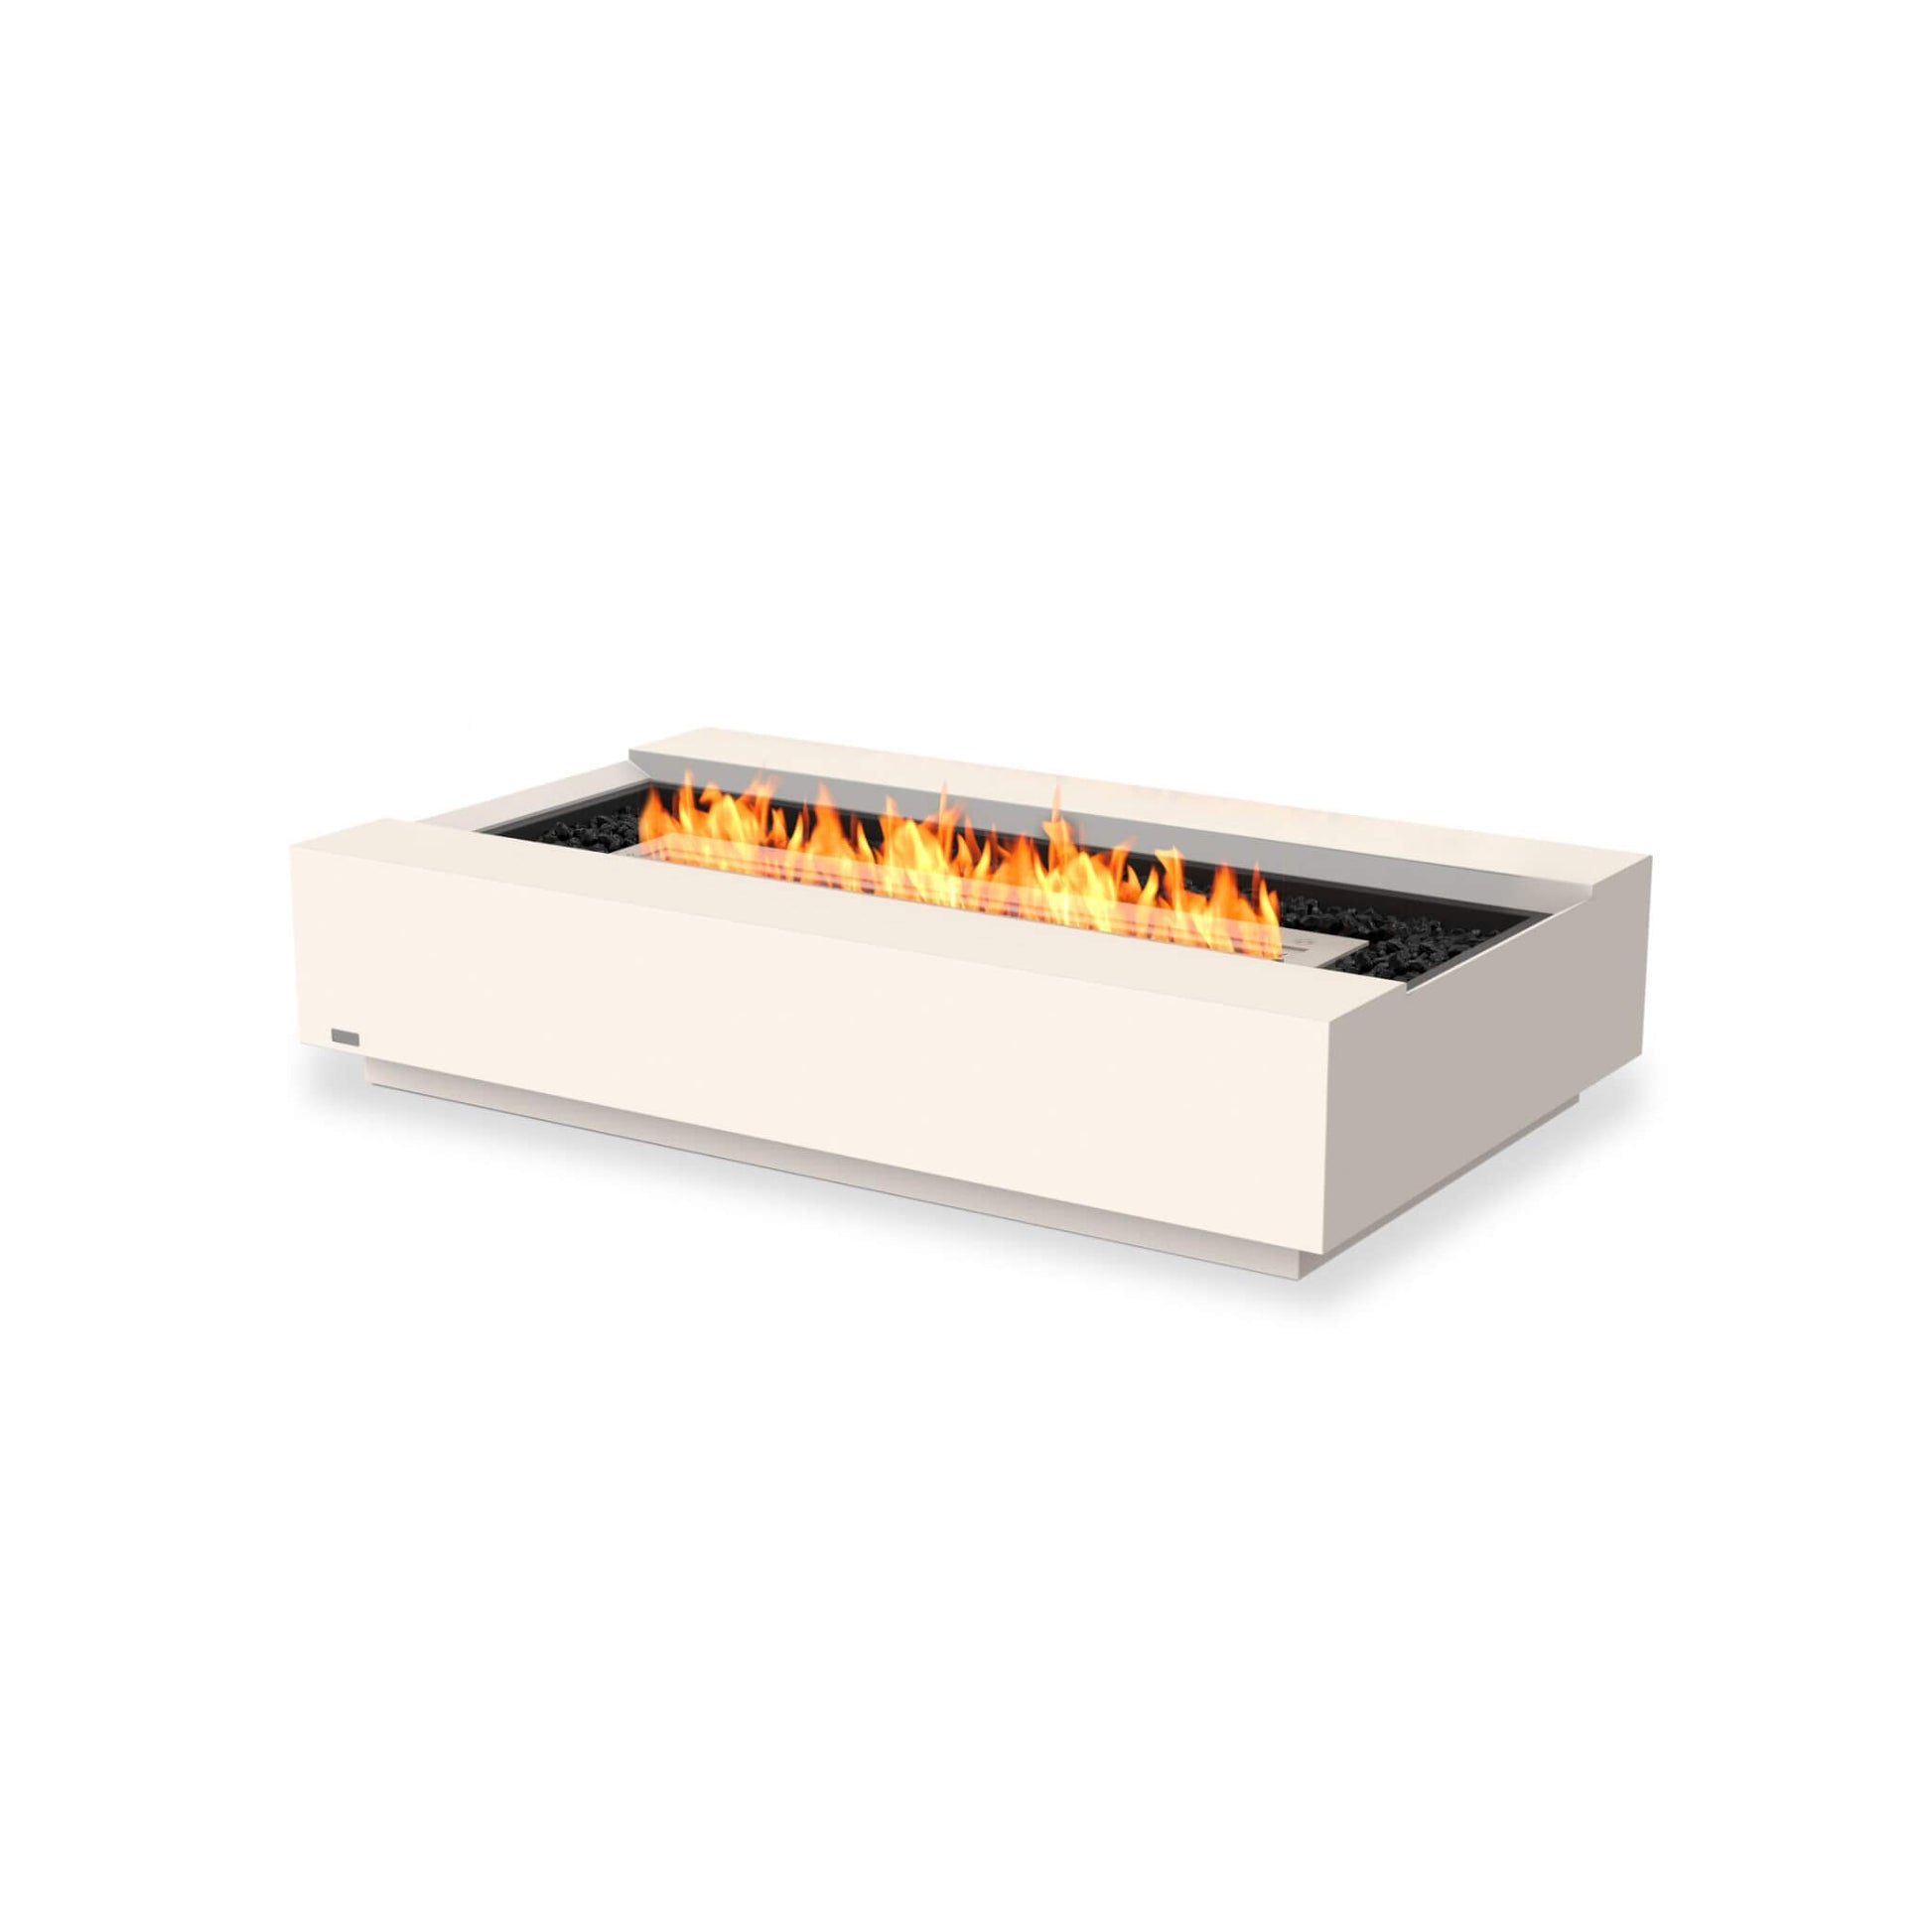 Cosmo 50 Linear Bio Ethanol Concrete Fire Pit Coffee Table with stainess steel burner  in Bone white for Indoor & Outdoor Heating by Ecosmart Fire